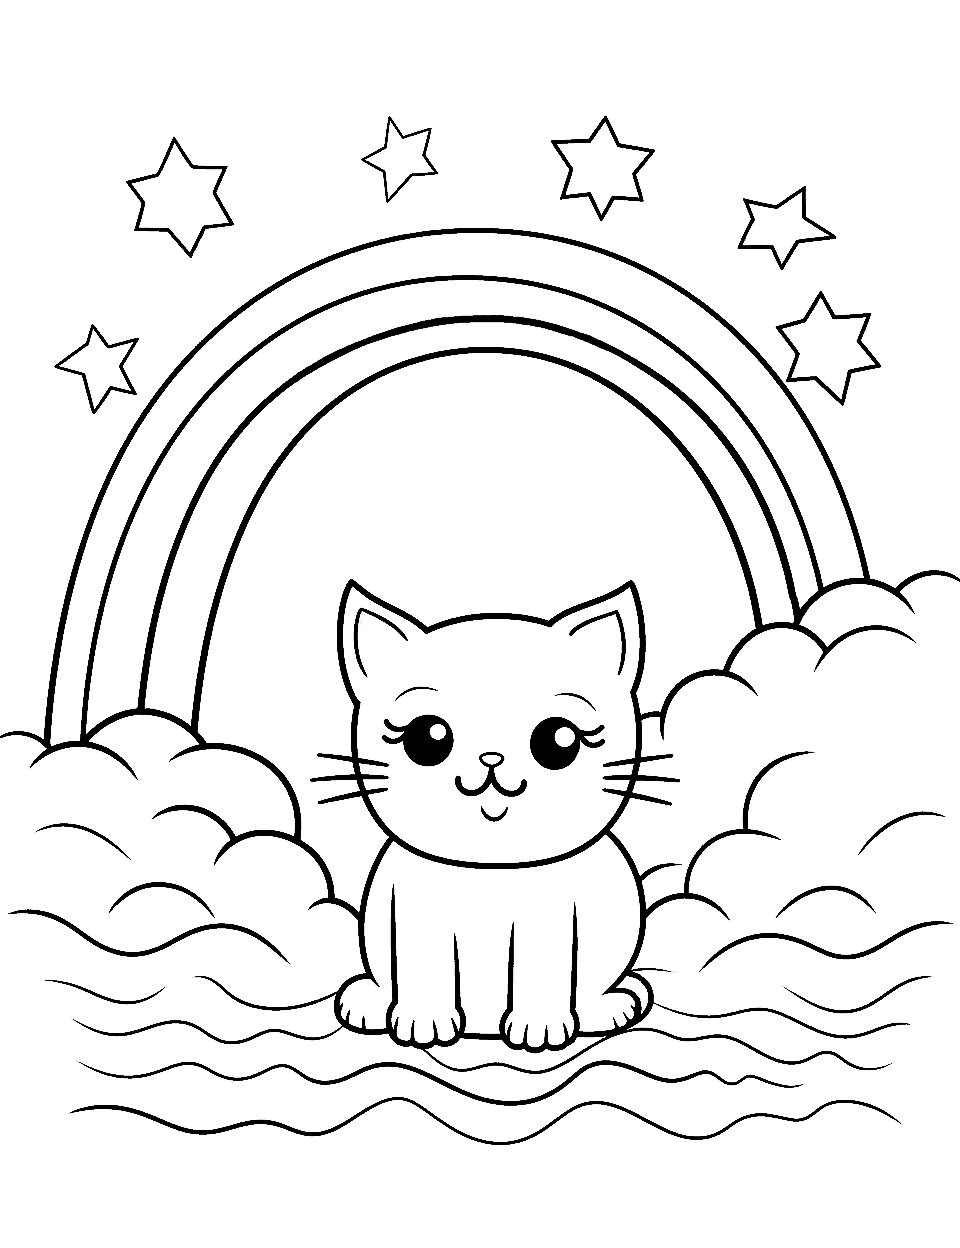 The Cat and Rainbow Coloring Page - A mischievous cat trying to catch the colors of a rainbow.